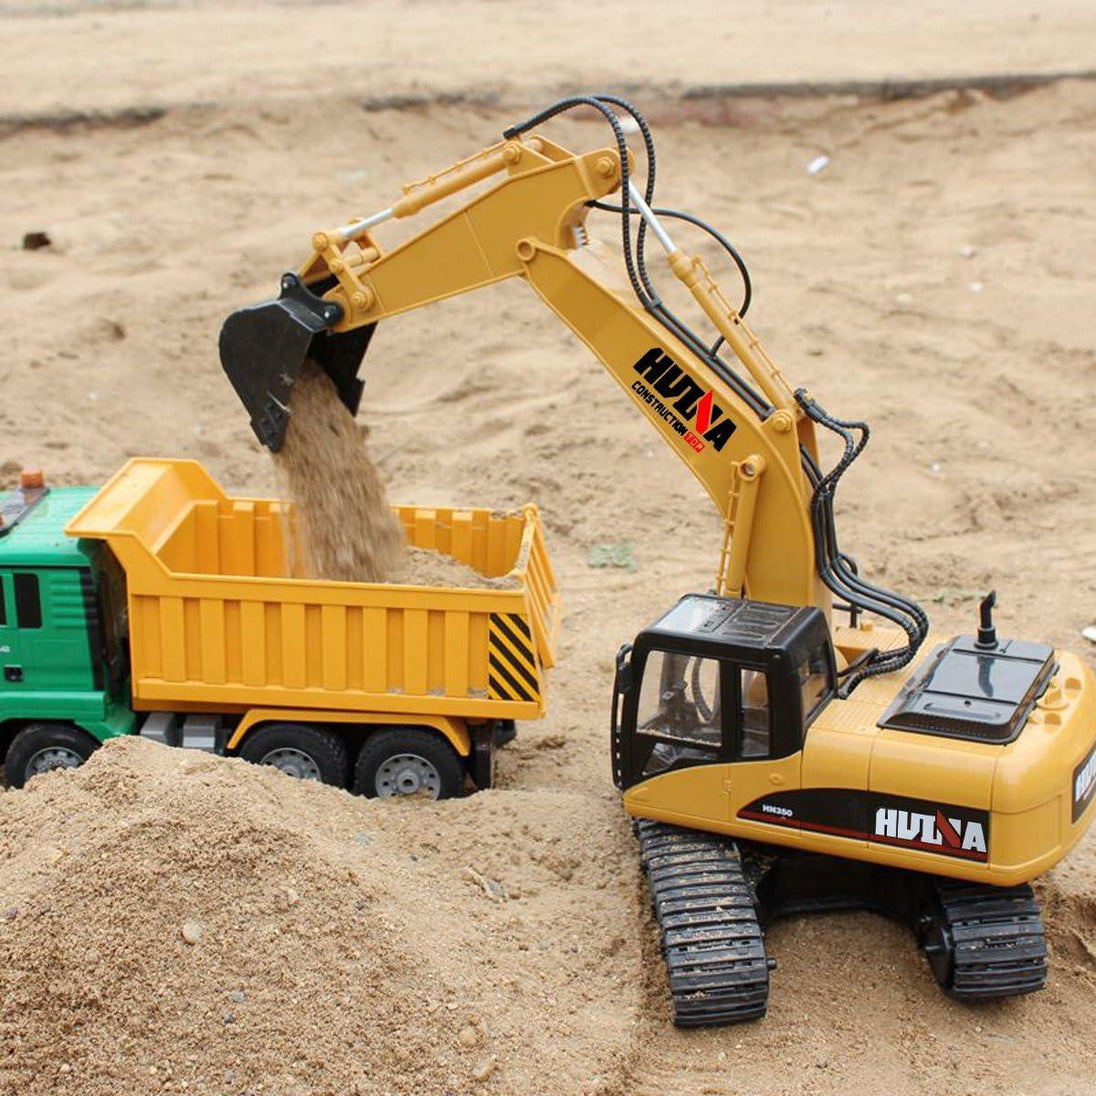 Remote Control Excavator Digger Construction RC Truck Vehicle Toys for Kids Gift Products On Sale Australia | Baby & Kids > Ride on Cars, Go-karts & Bikes Category